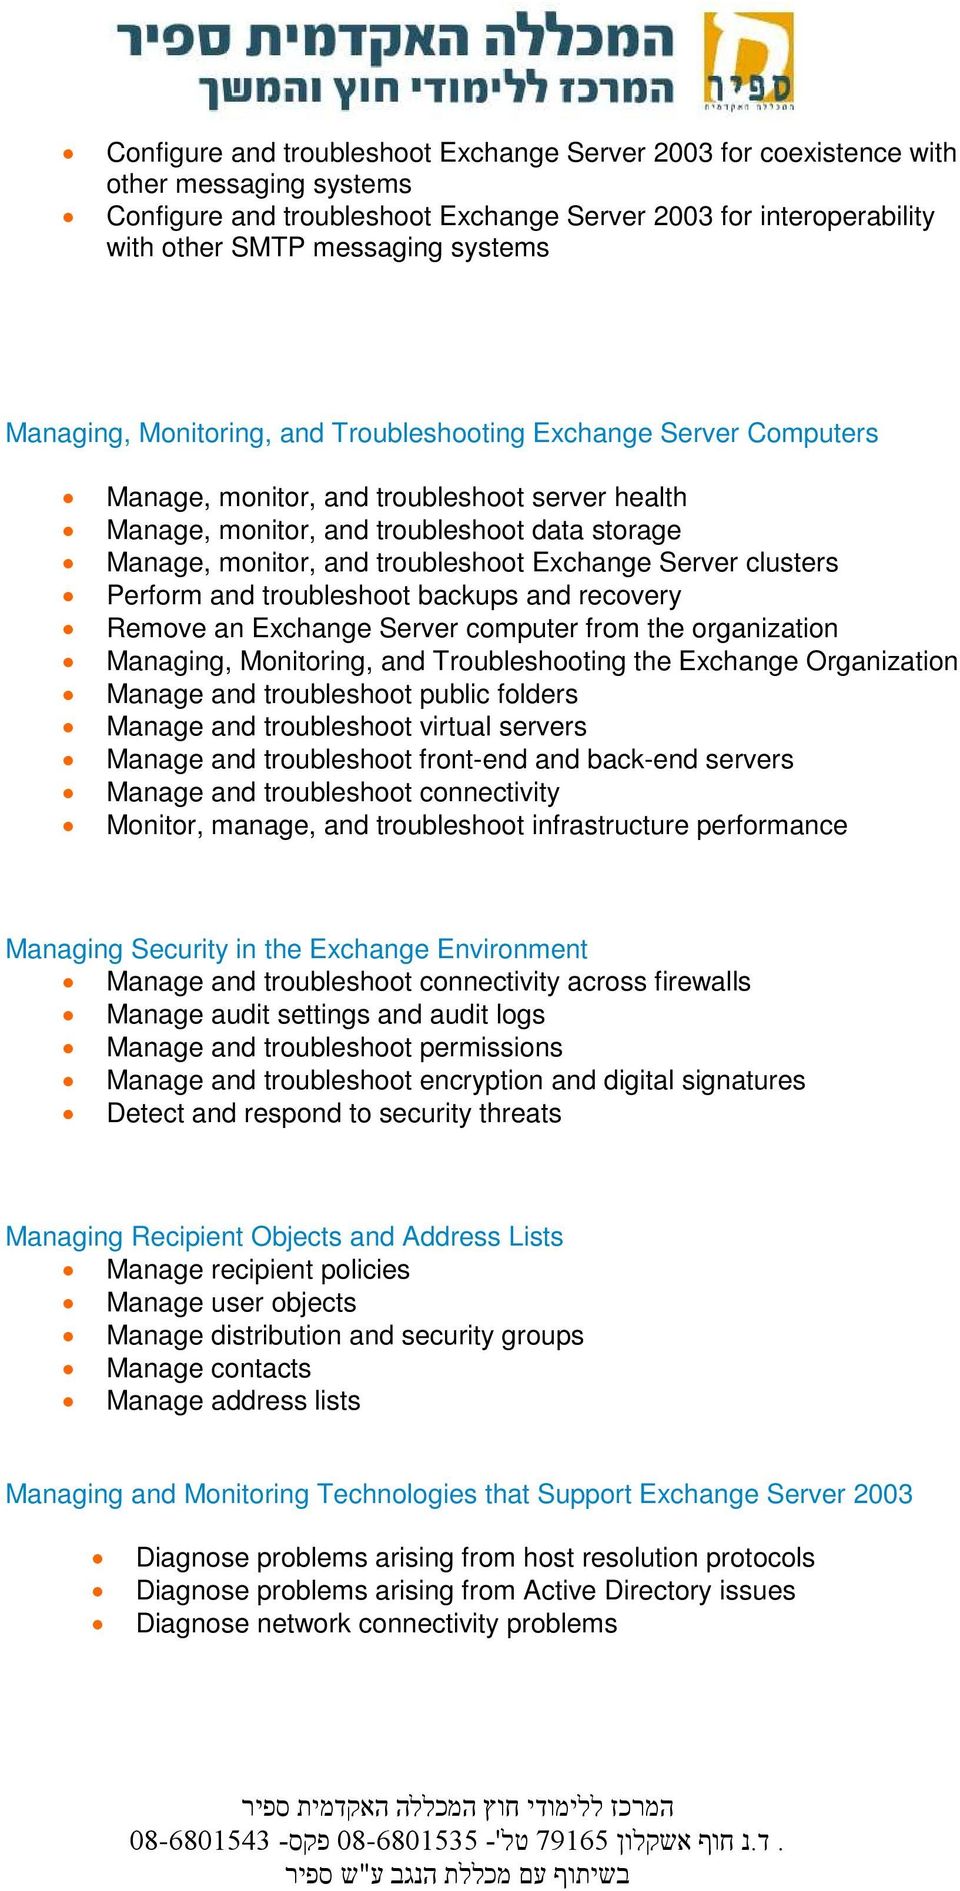 Exchange Server clusters Perform and troubleshoot backups and recovery Remove an Exchange Server computer from the organization Managing, Monitoring, and Troubleshooting the Exchange Organization